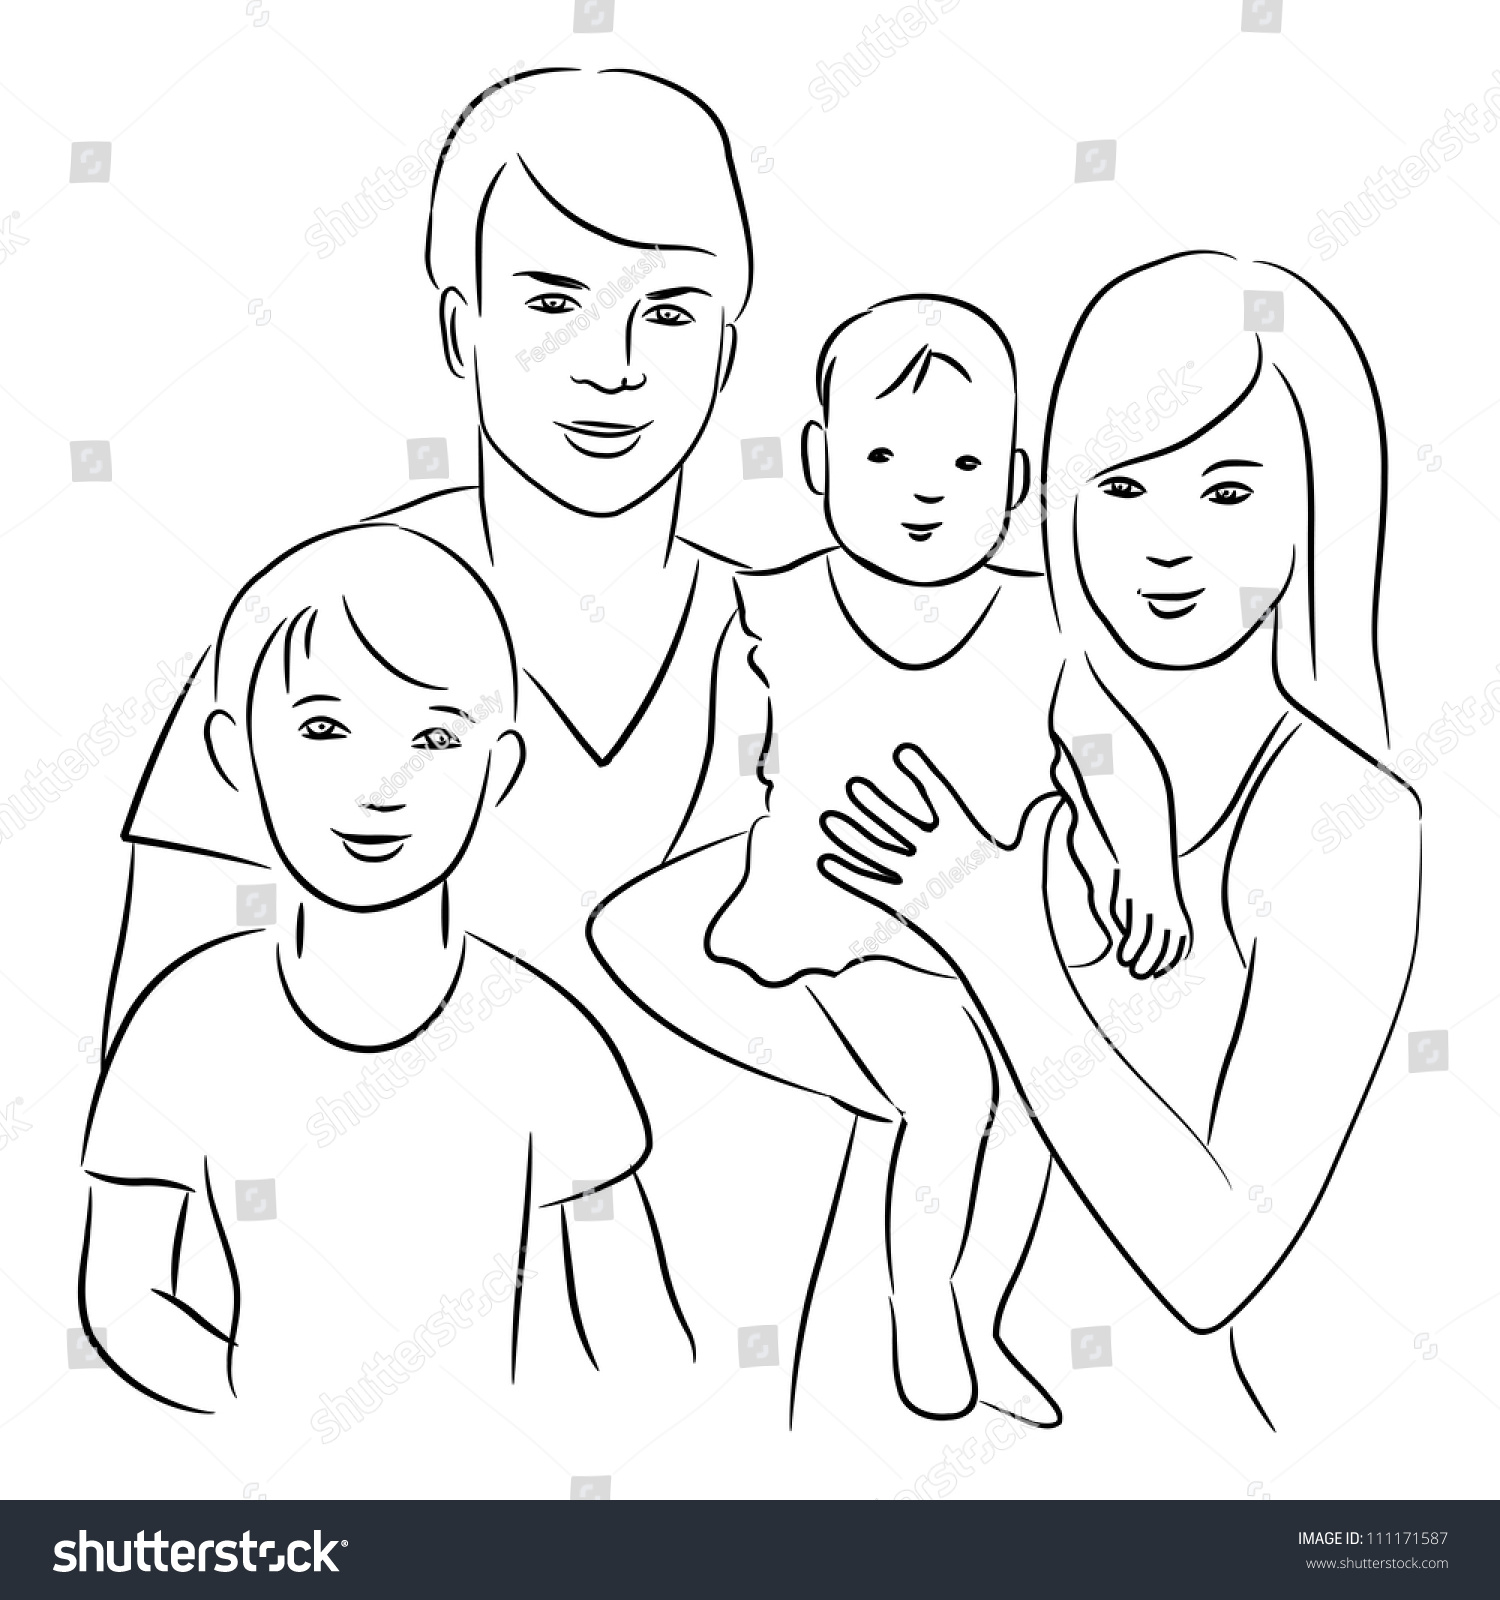 Family Sketch Drawing Stock Vector 111171587 - Shutterstock